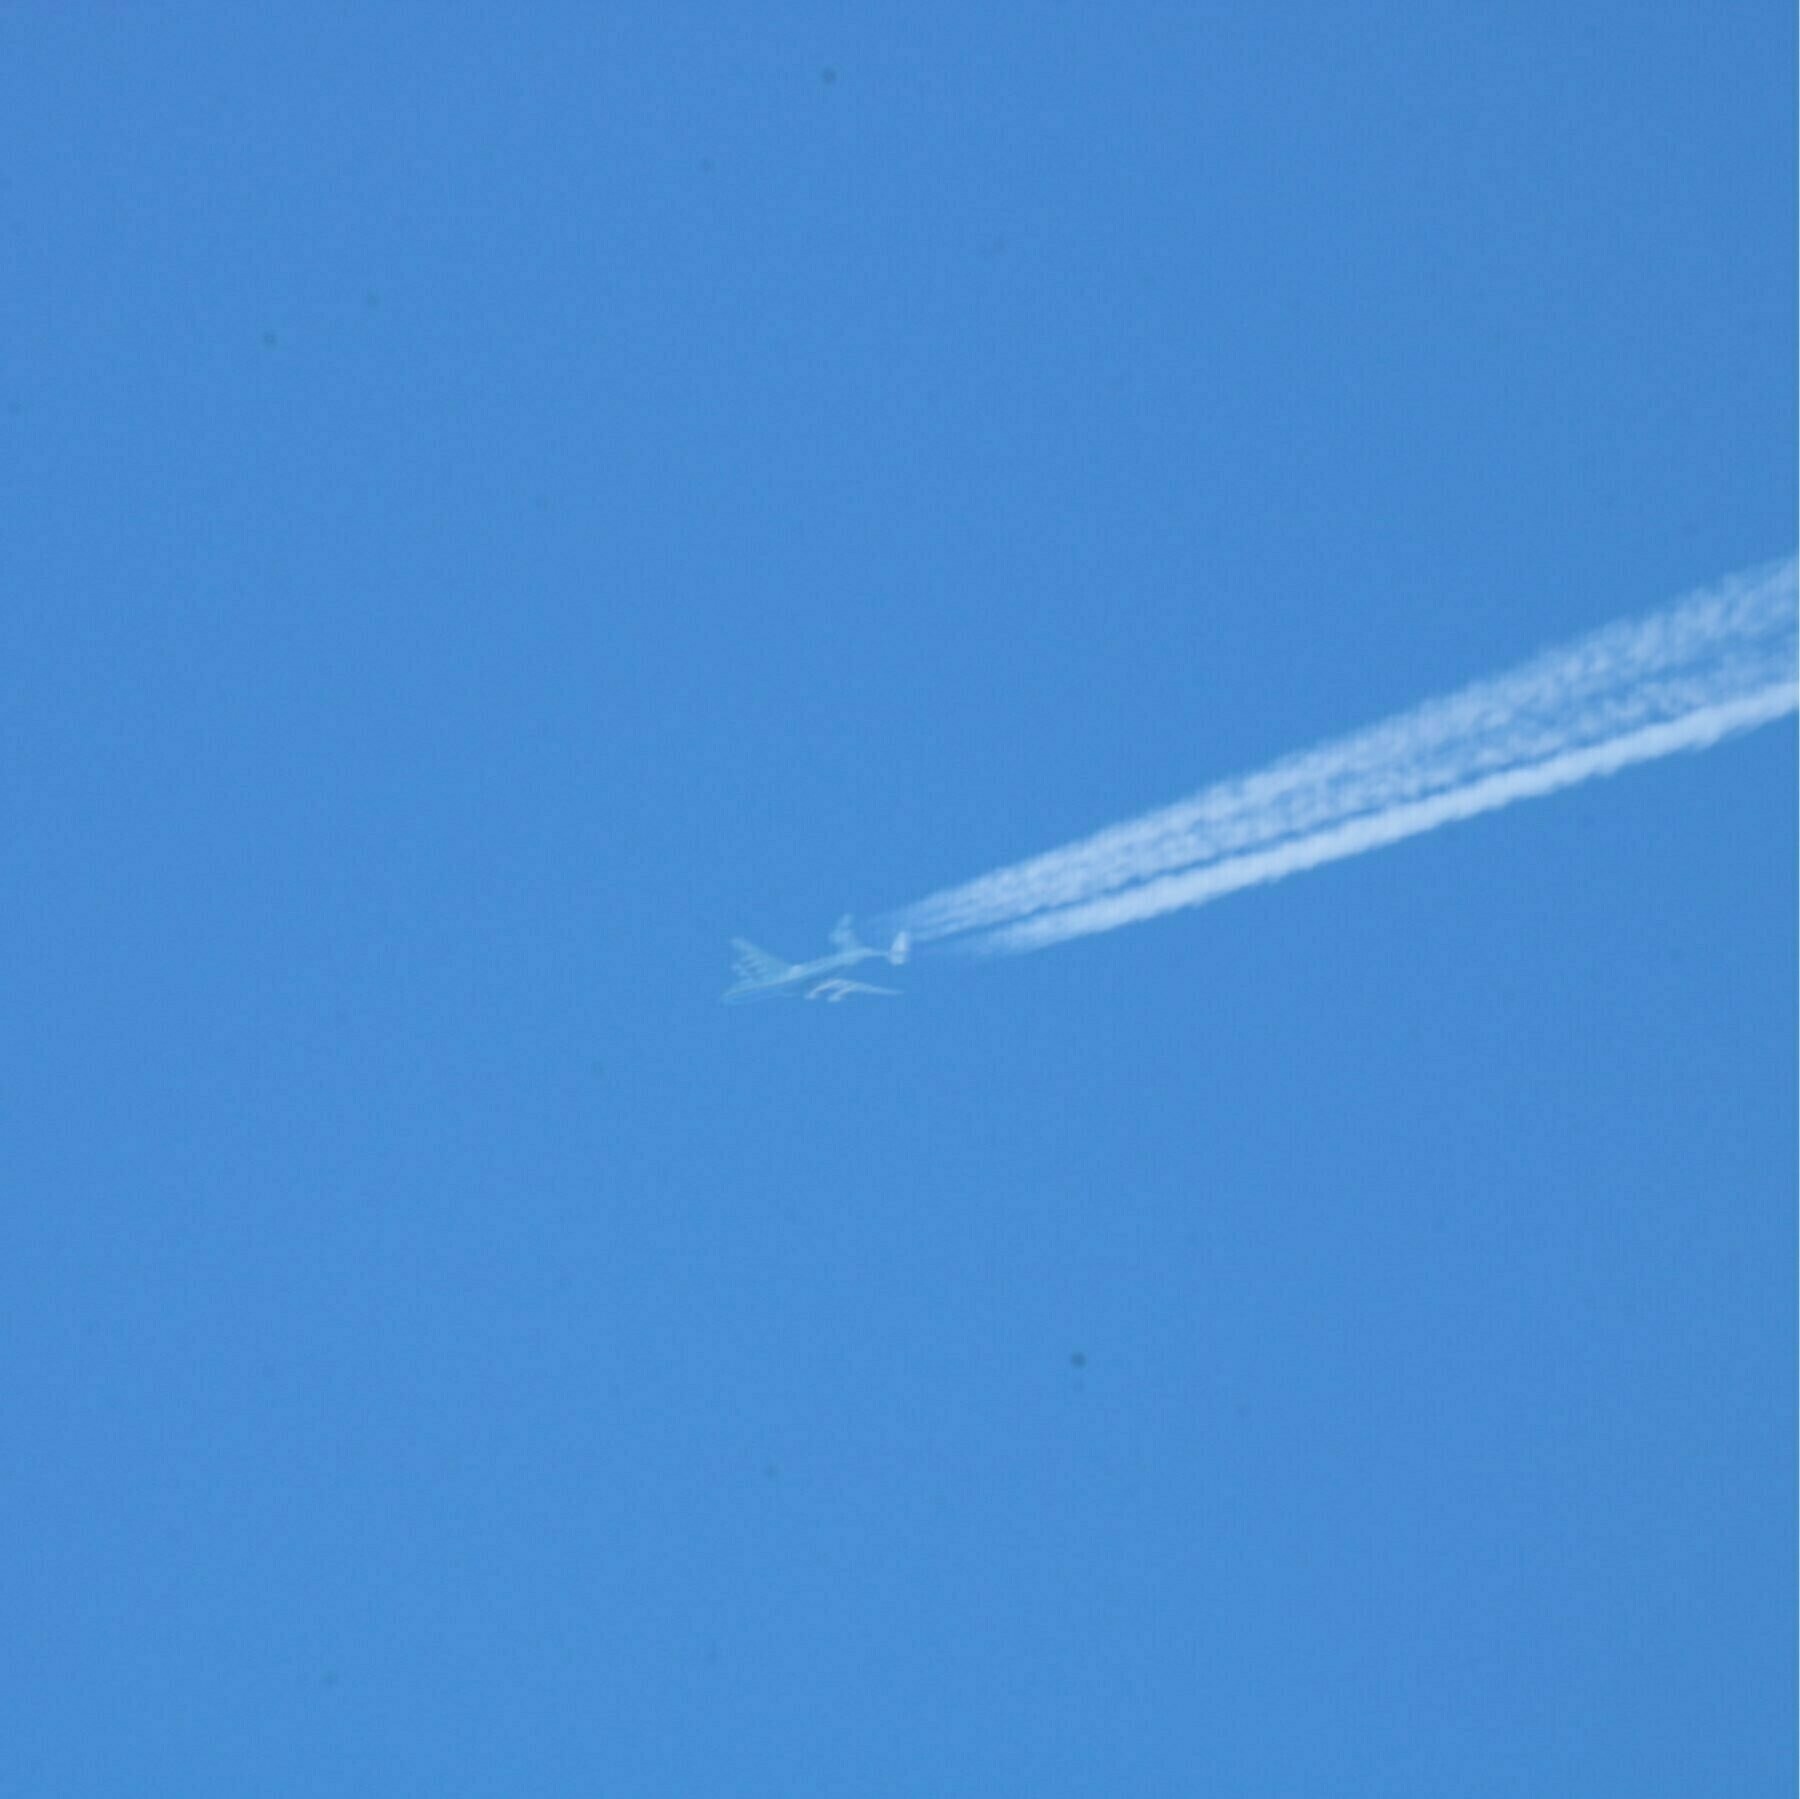 huge Antonov airplane and its contrail